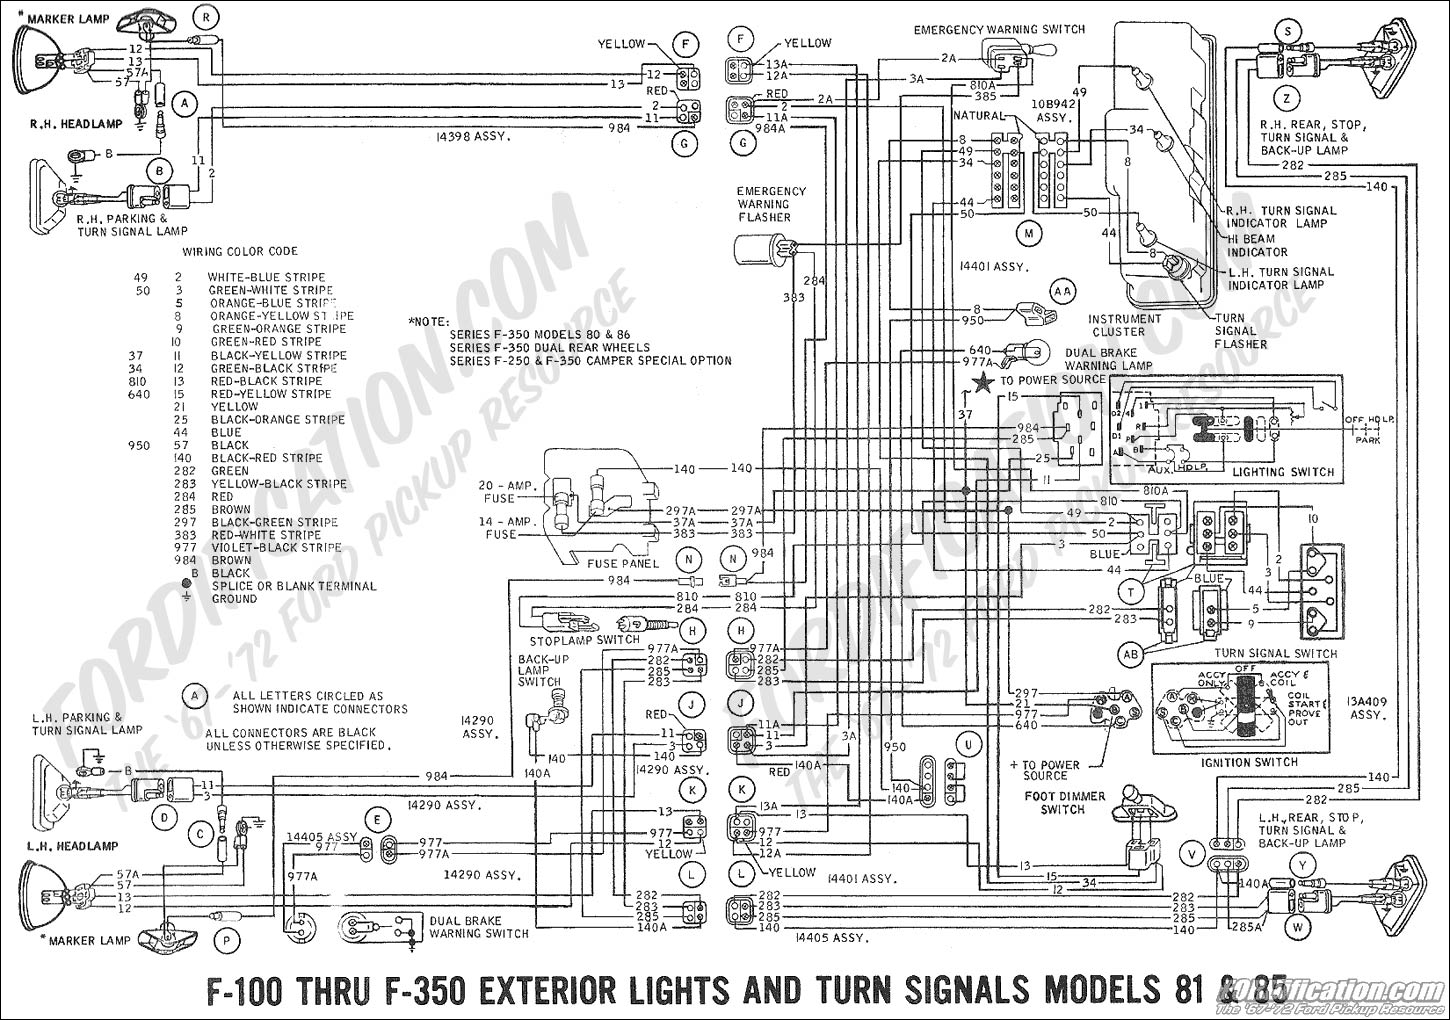 Ford Truck Technical Drawings and Schematics - Section H - Wiring Diagrams Glow Plug Wiring Diagram FORDification.com